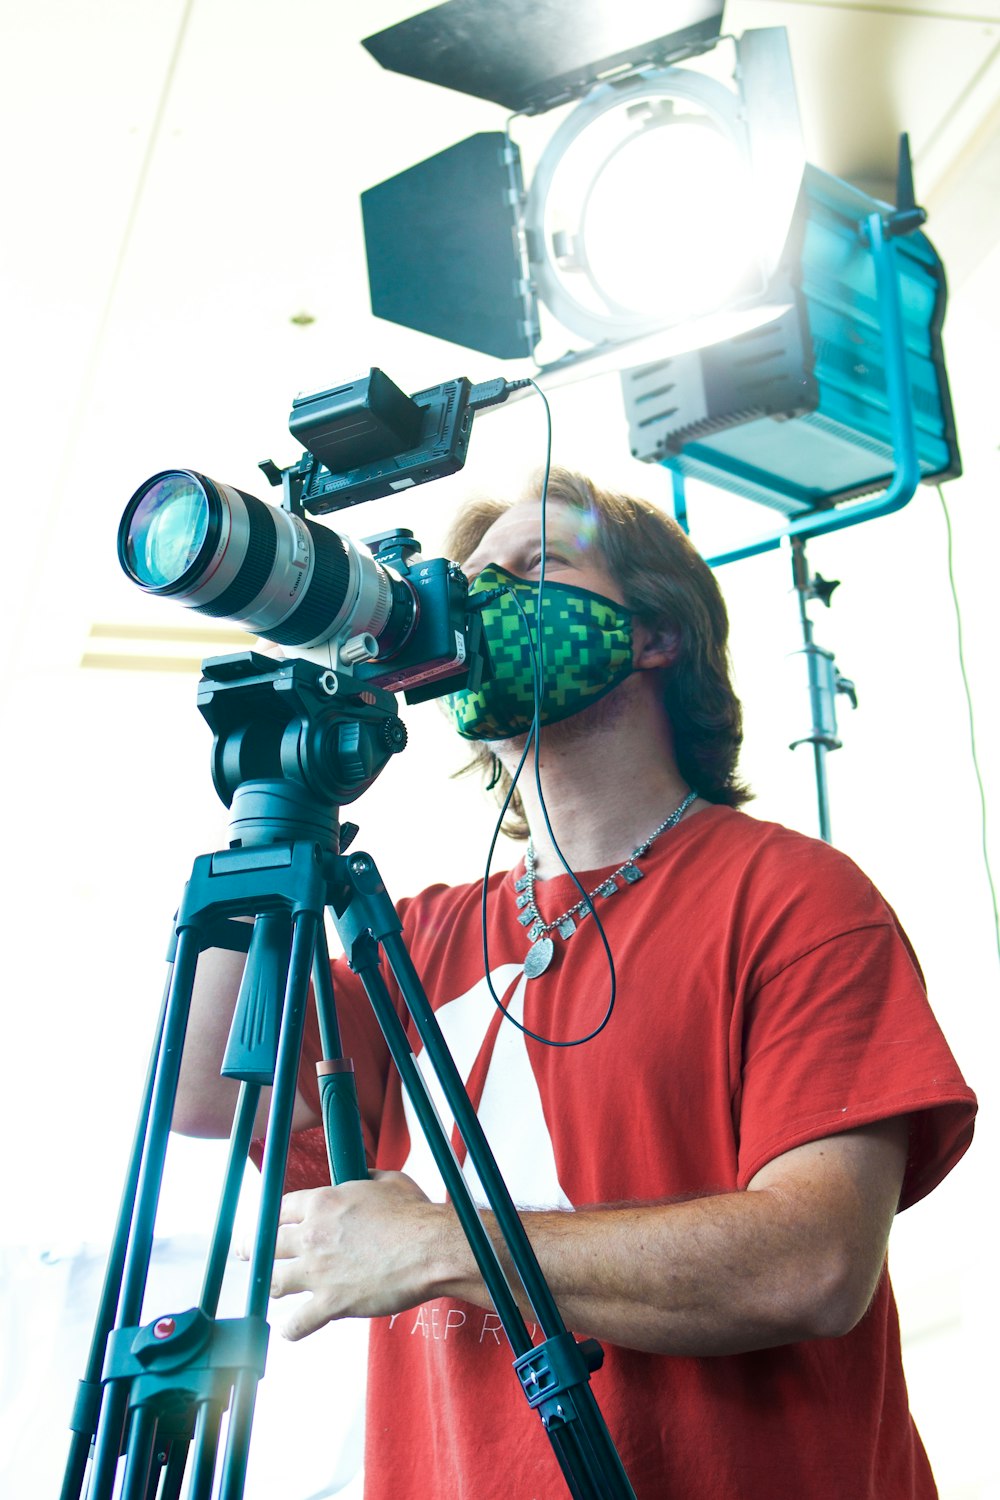 a man in a red shirt and a camera